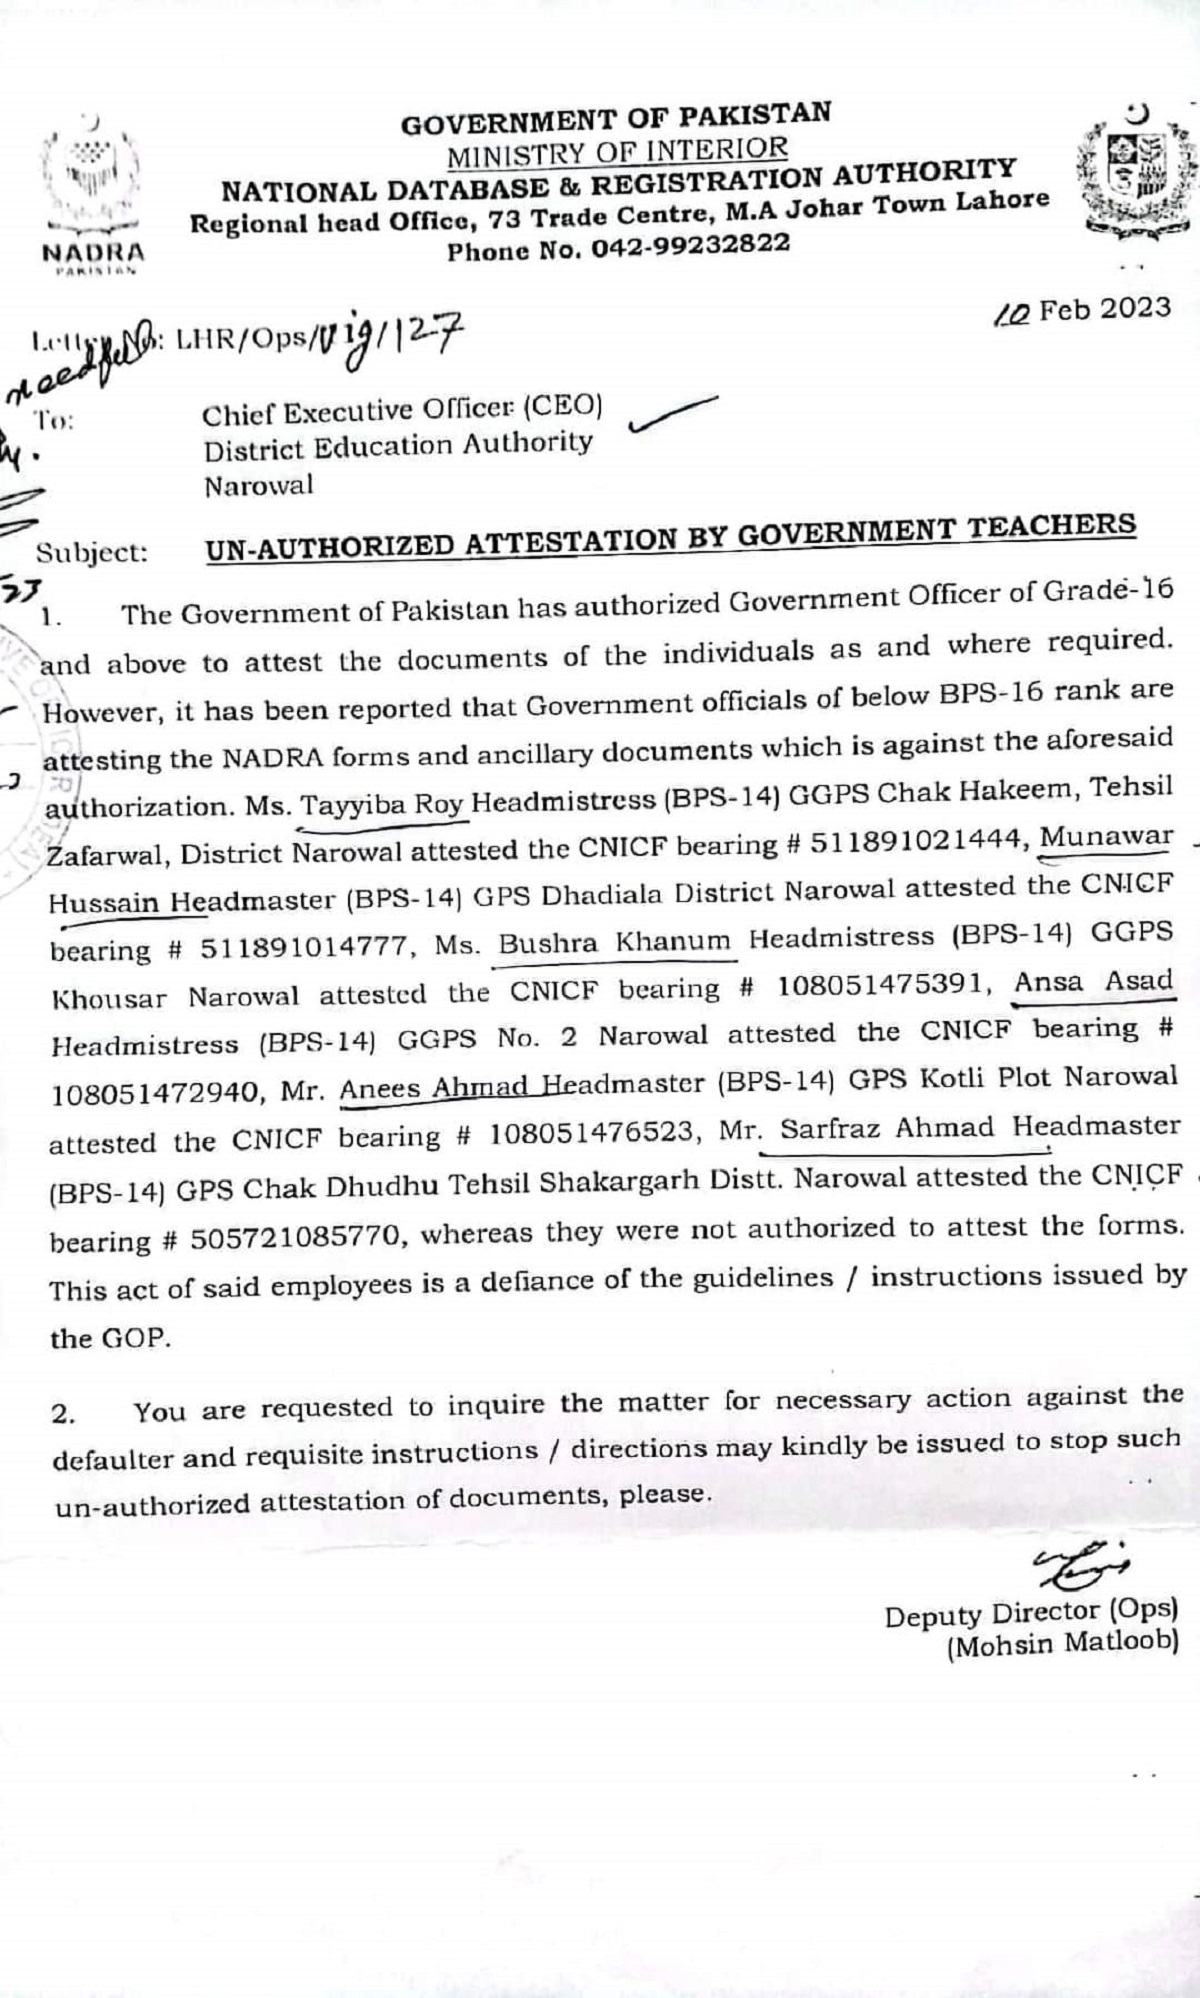 Unauthorize attestation of CNIC Forms by PST Teachers